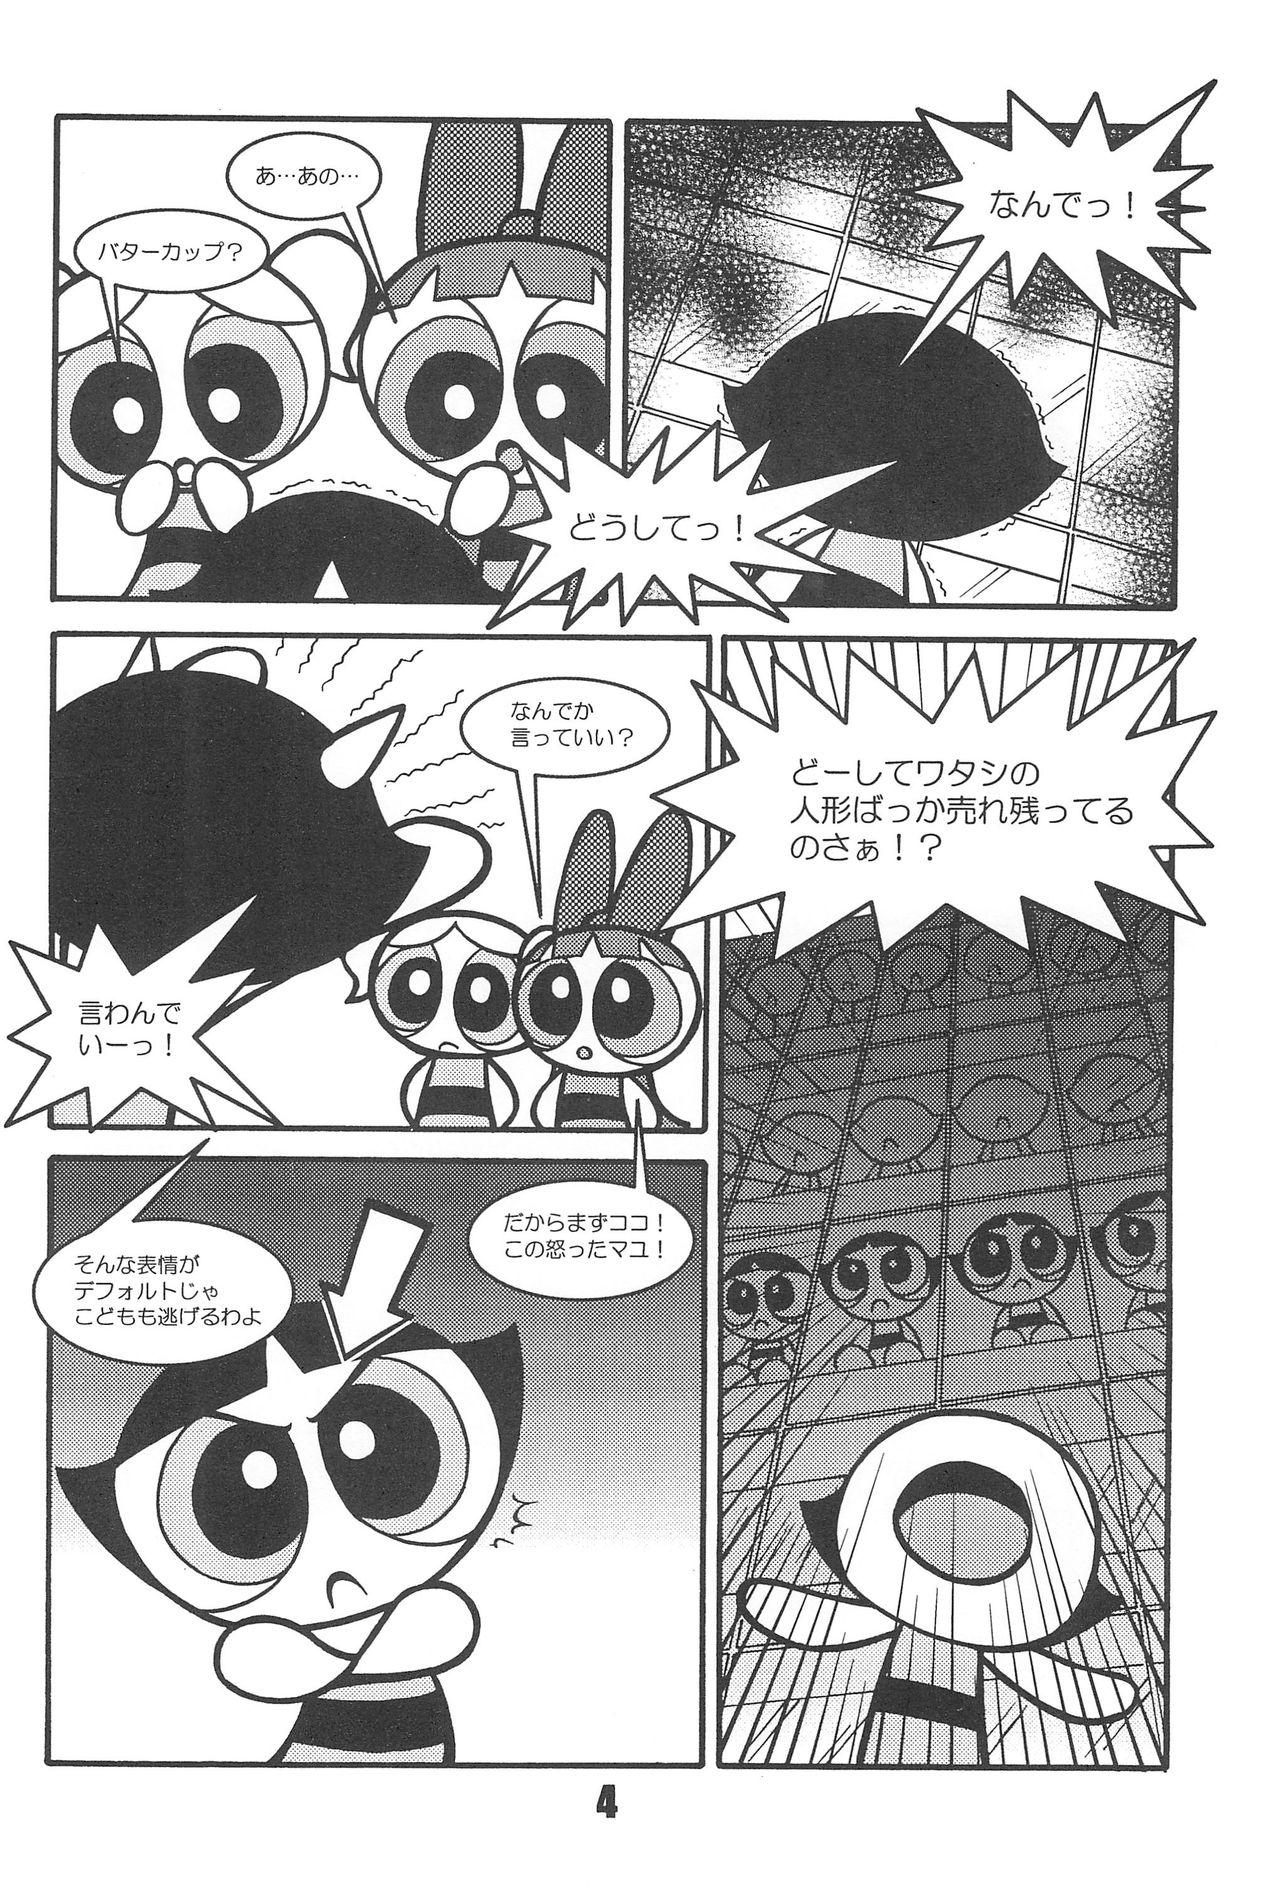 Toy Show Goes On! Funhouse 22th - The powerpuff girls Fishnets - Page 4